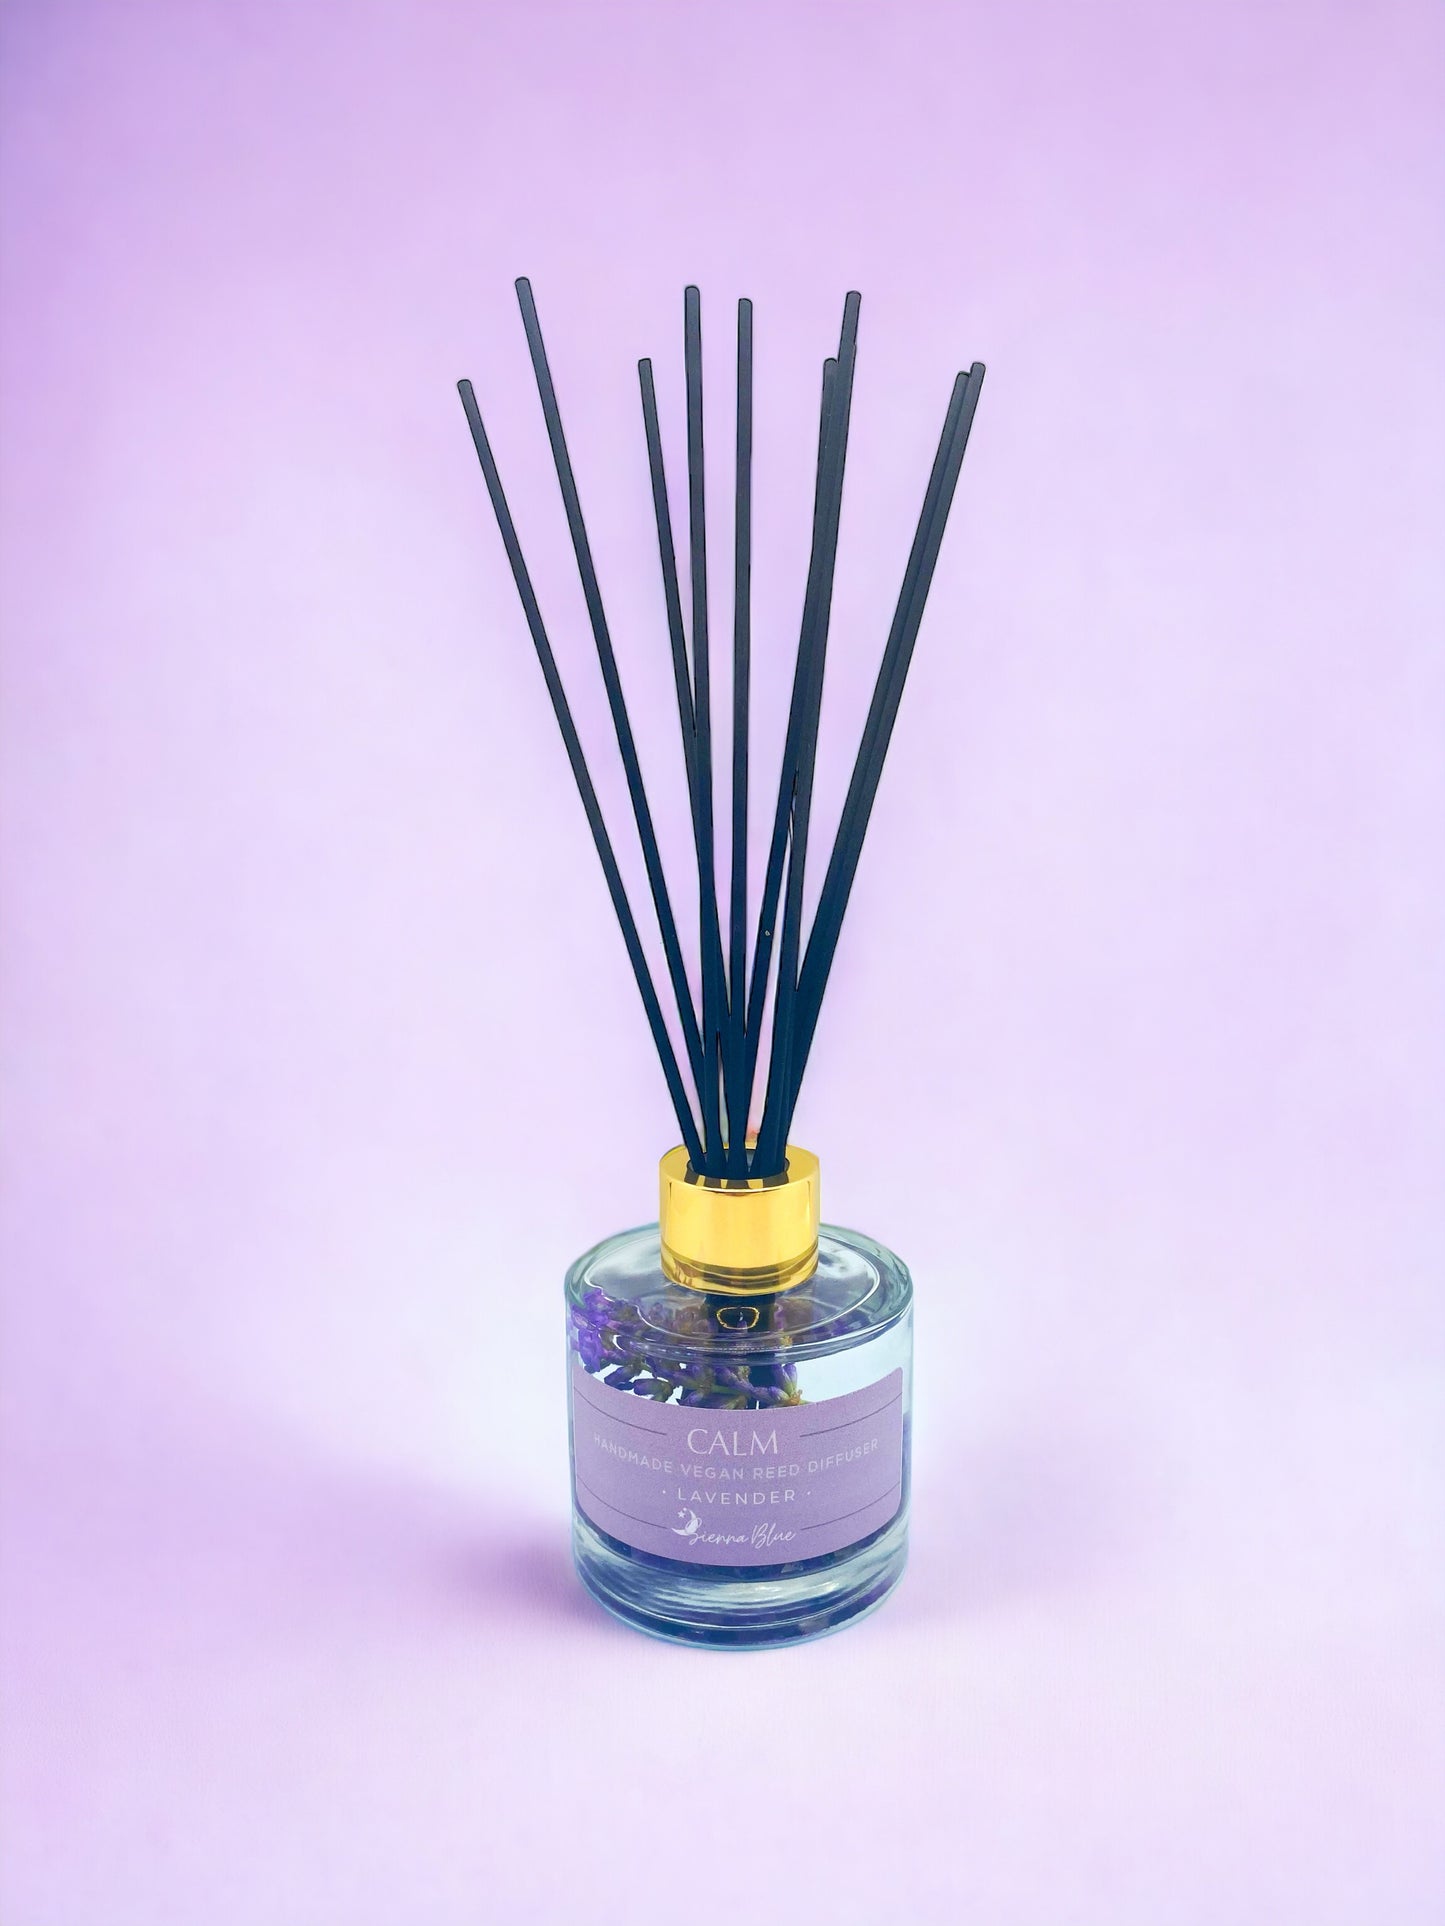 Amethyst infused reed diffuser, lavender fragrance